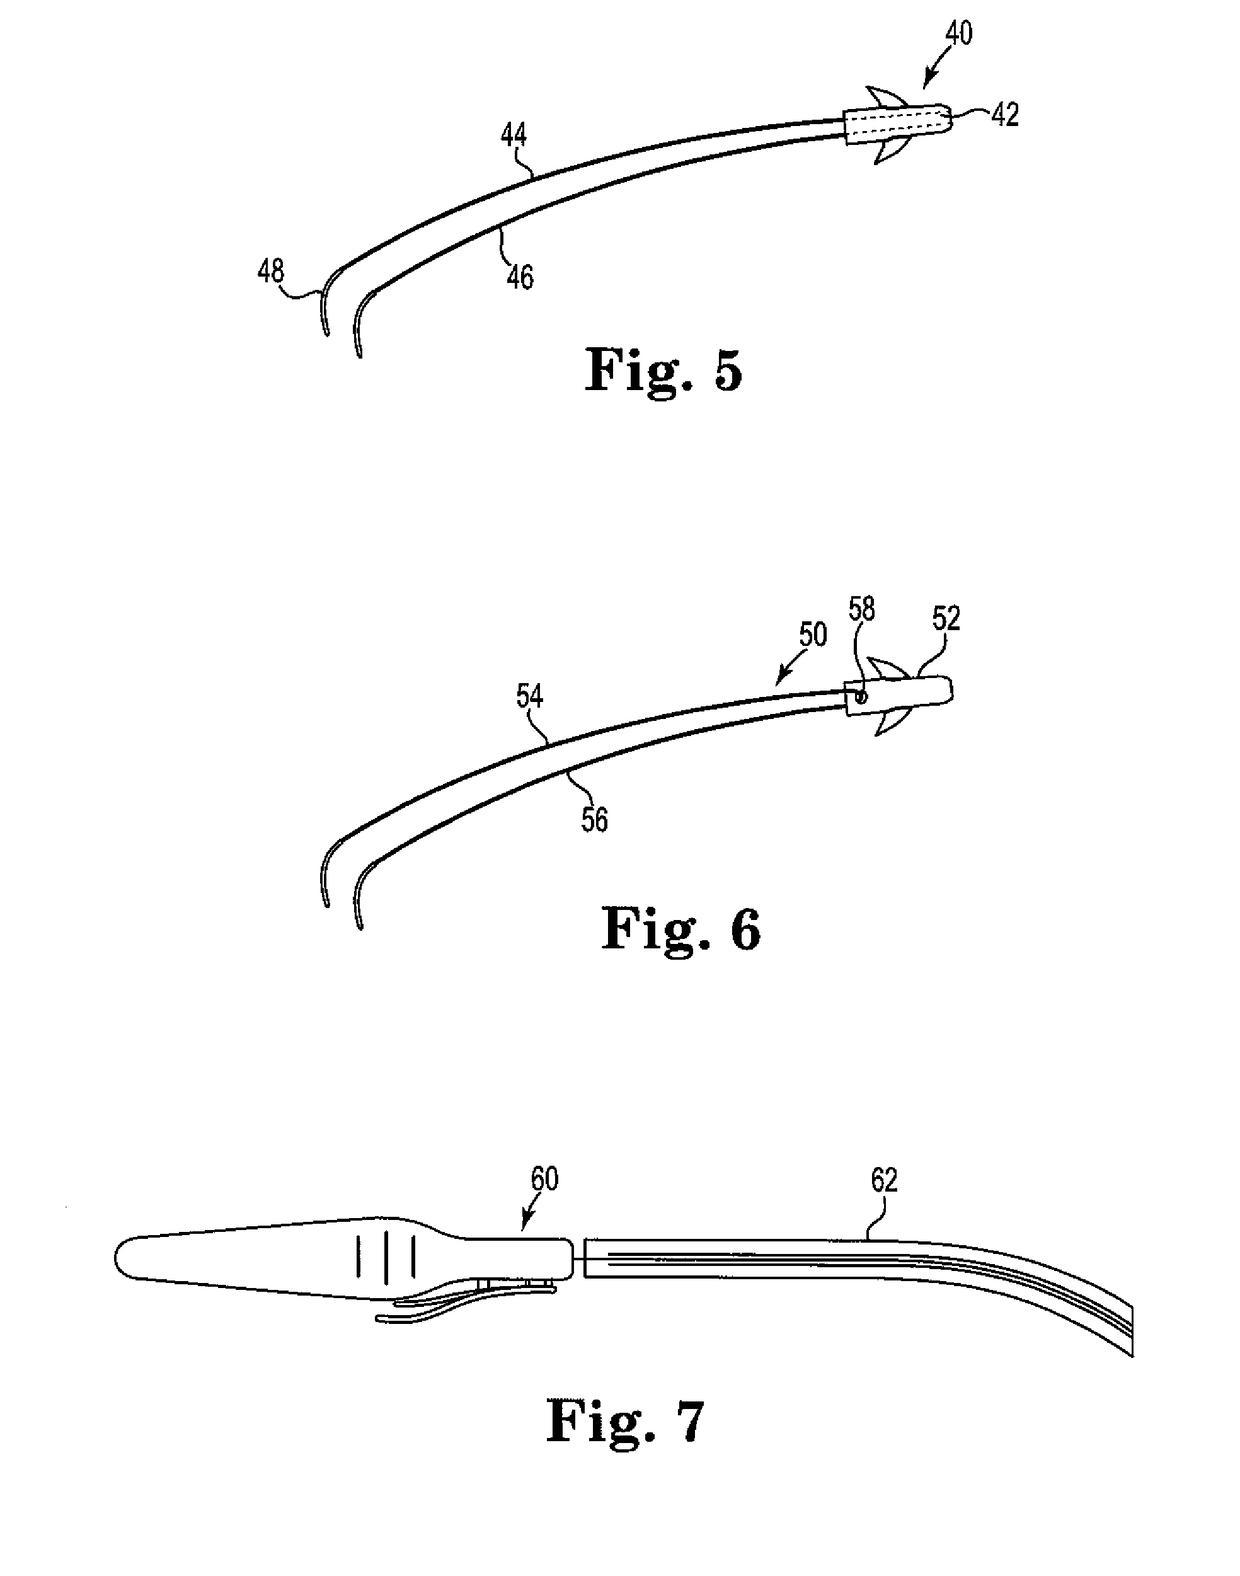 Implants, tools, and methods for treatments of pelvic conditions